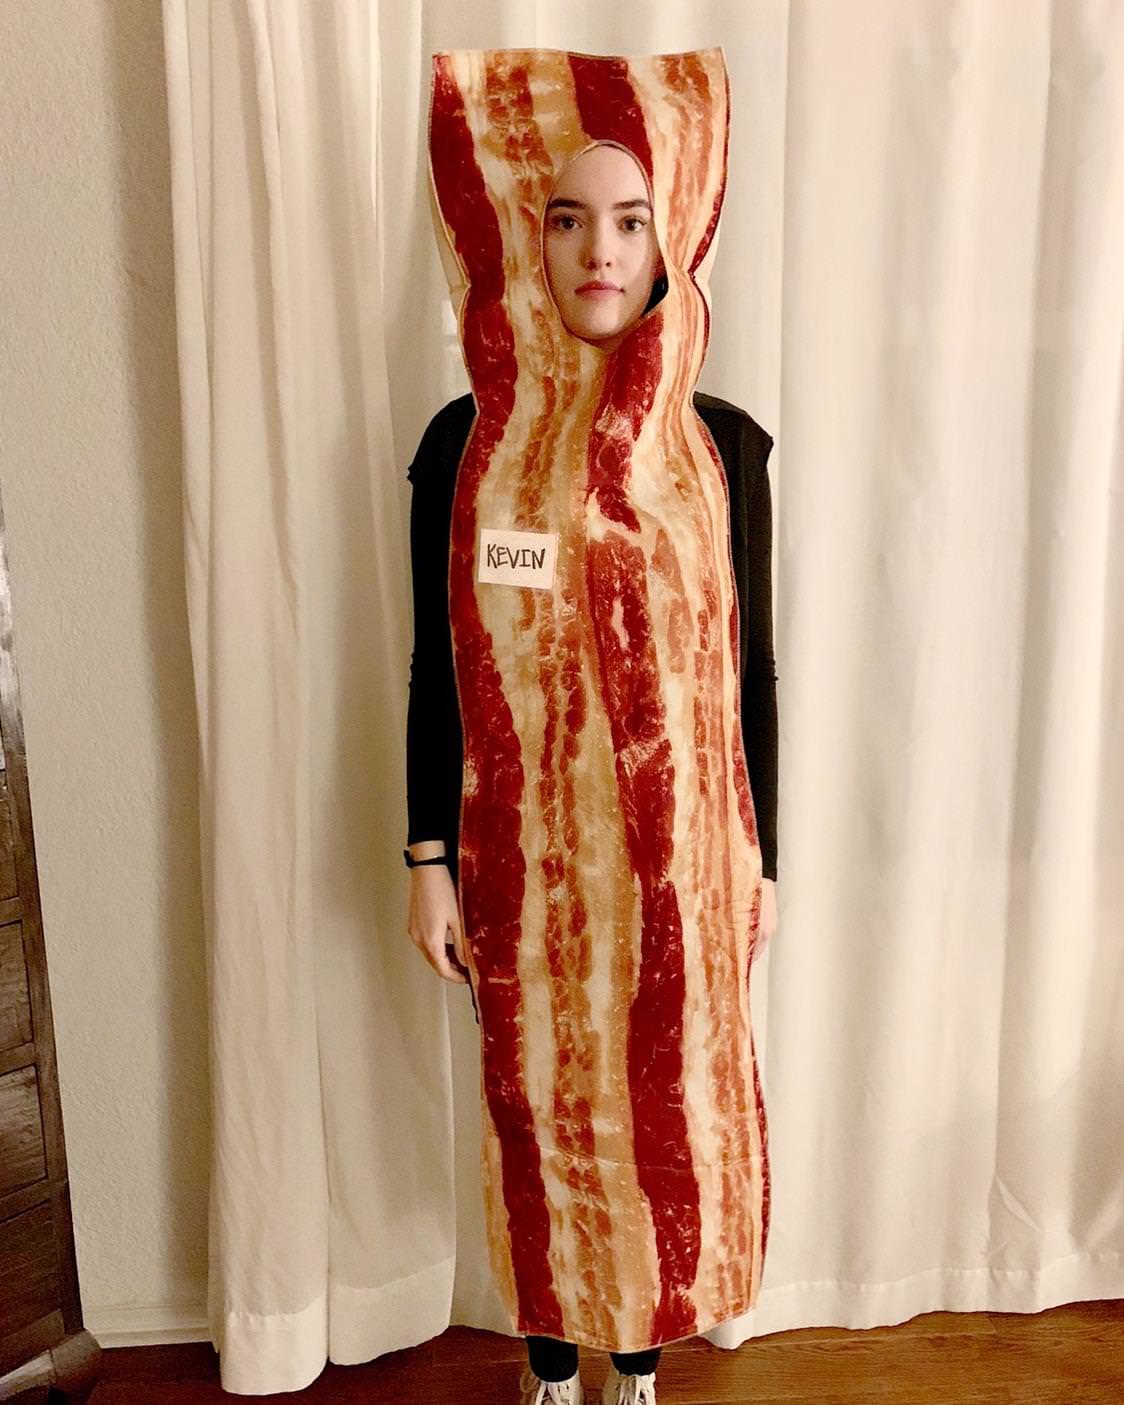 kevin bacon costume - Kevin